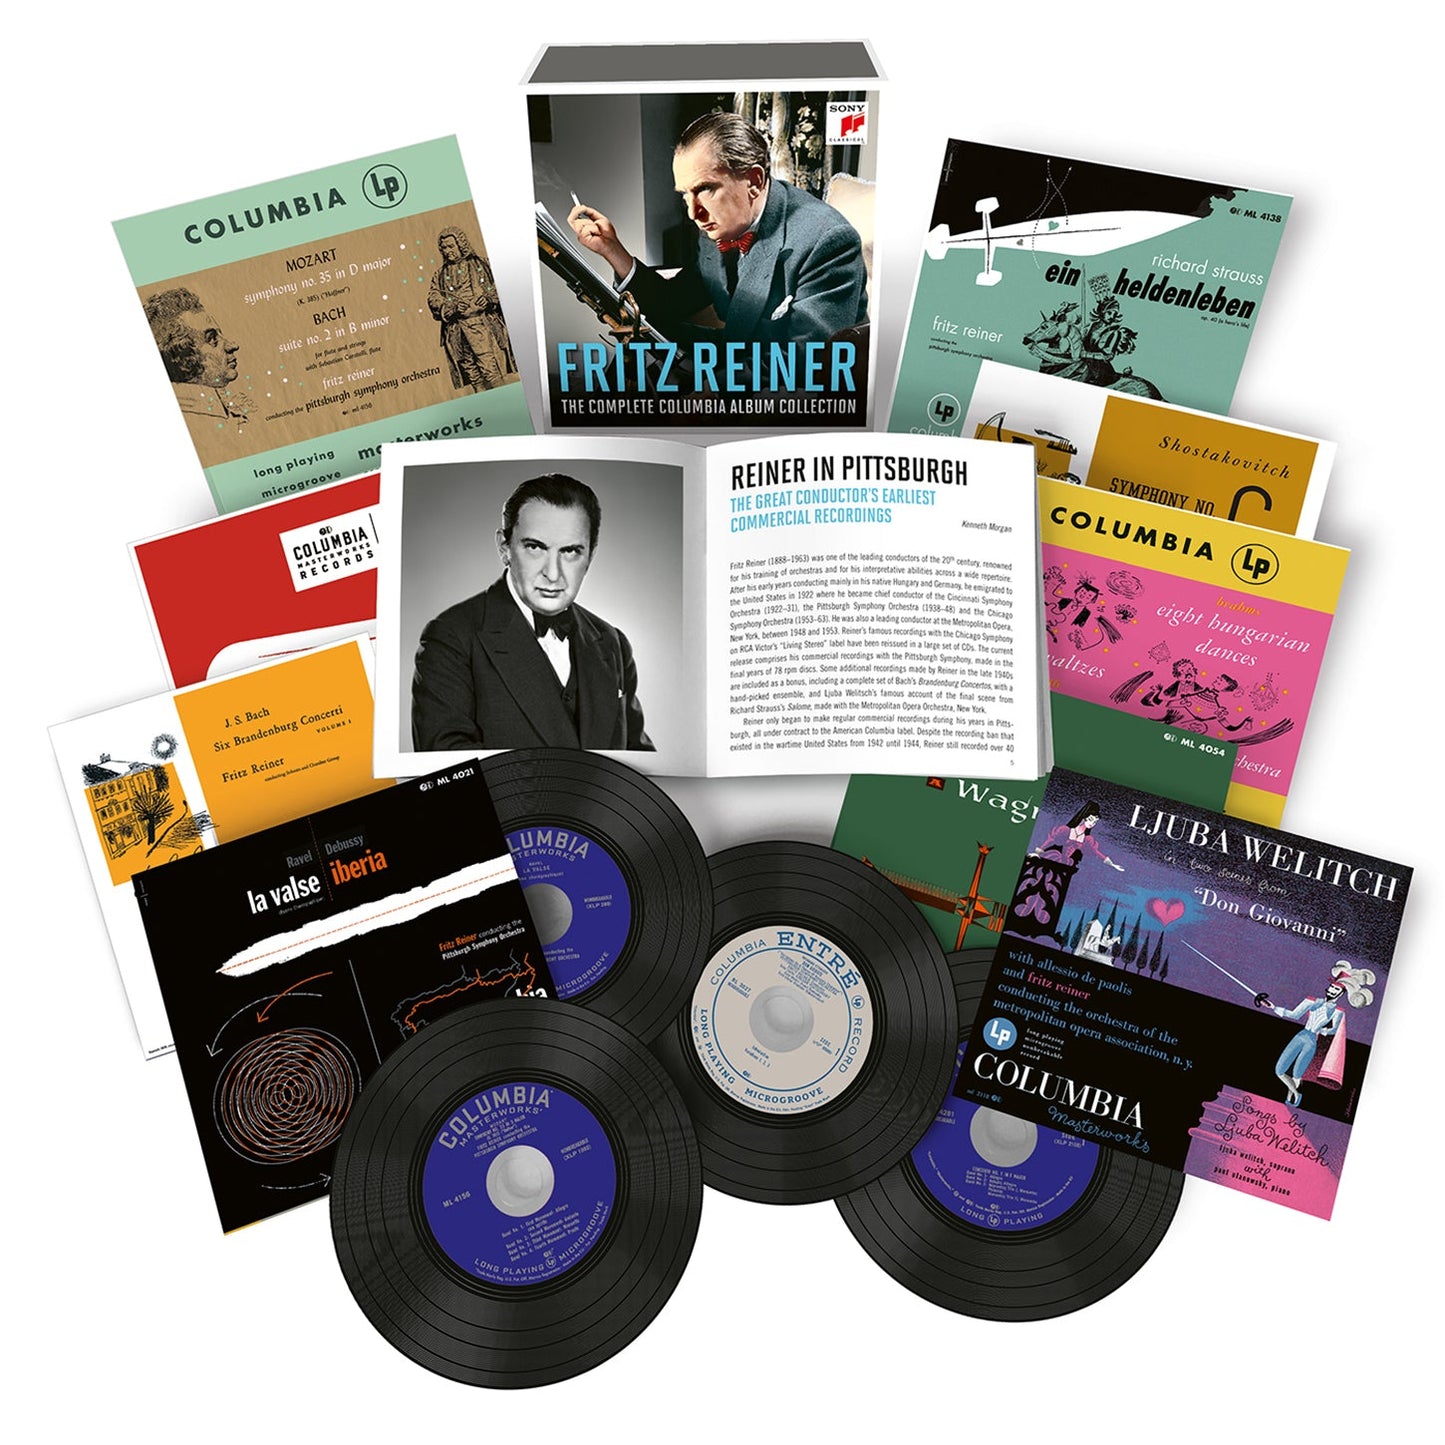 Fritz Reiner – The Complete Columbia Album Collection [14 CDs]